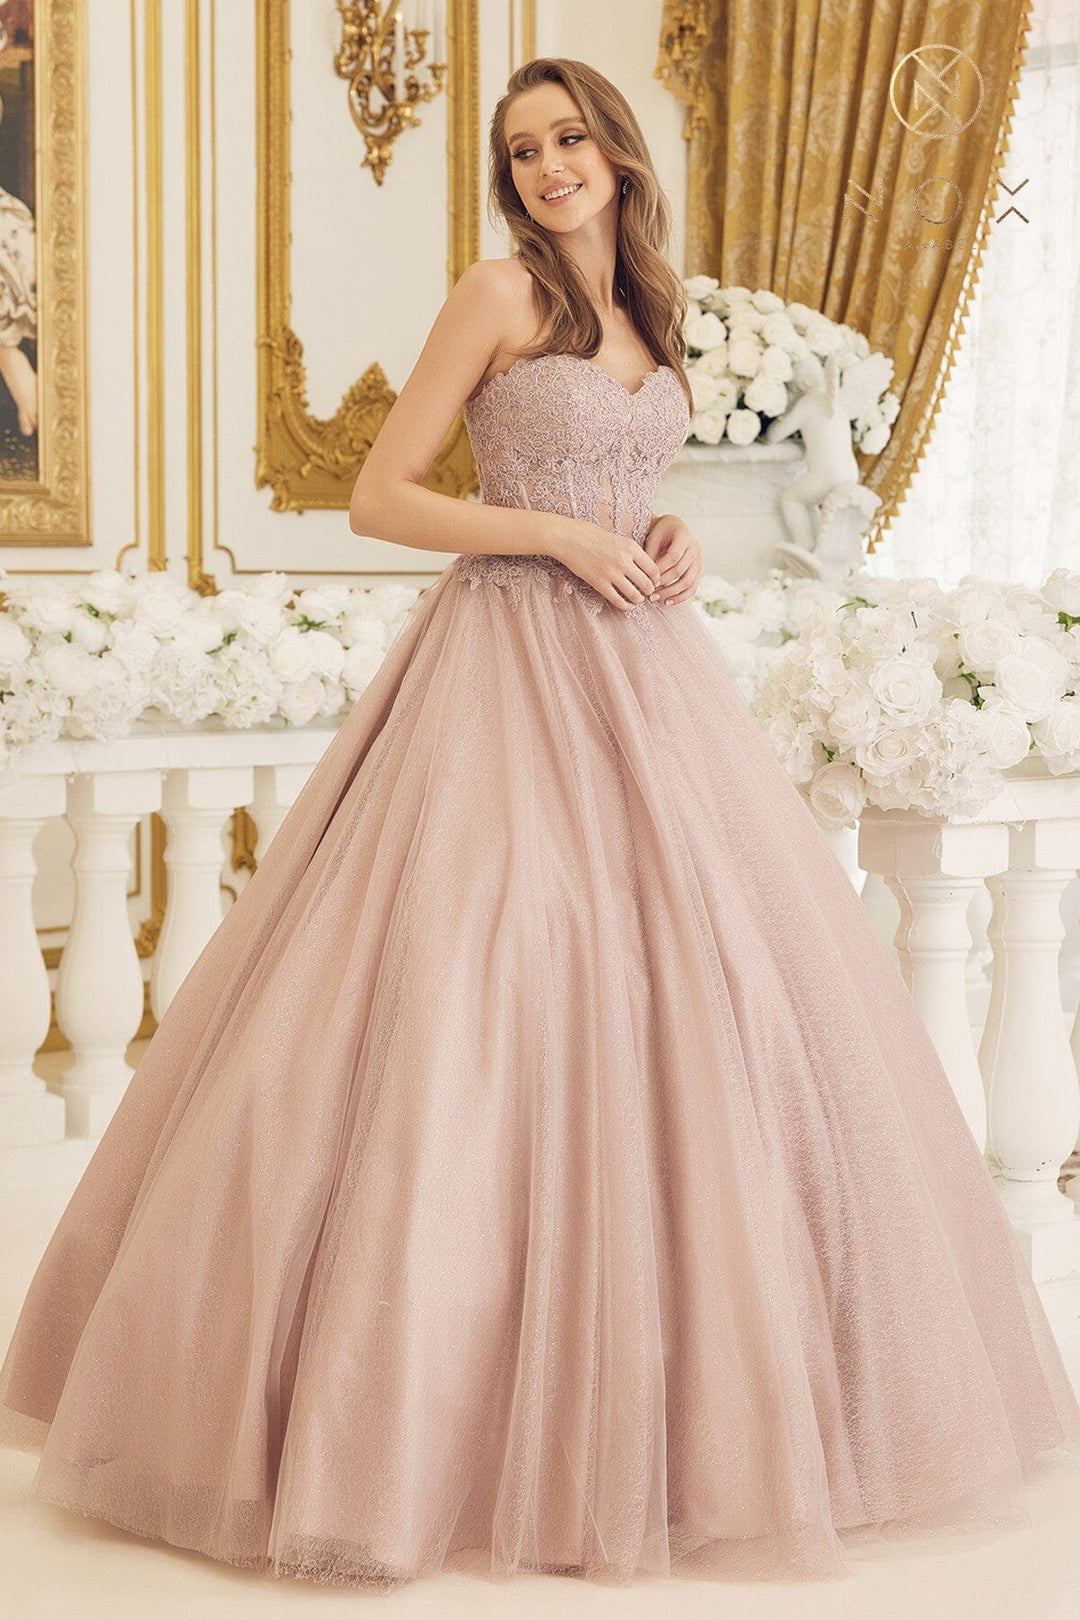 Applique Strapless Ball Gown by Nox Anabel CU1102